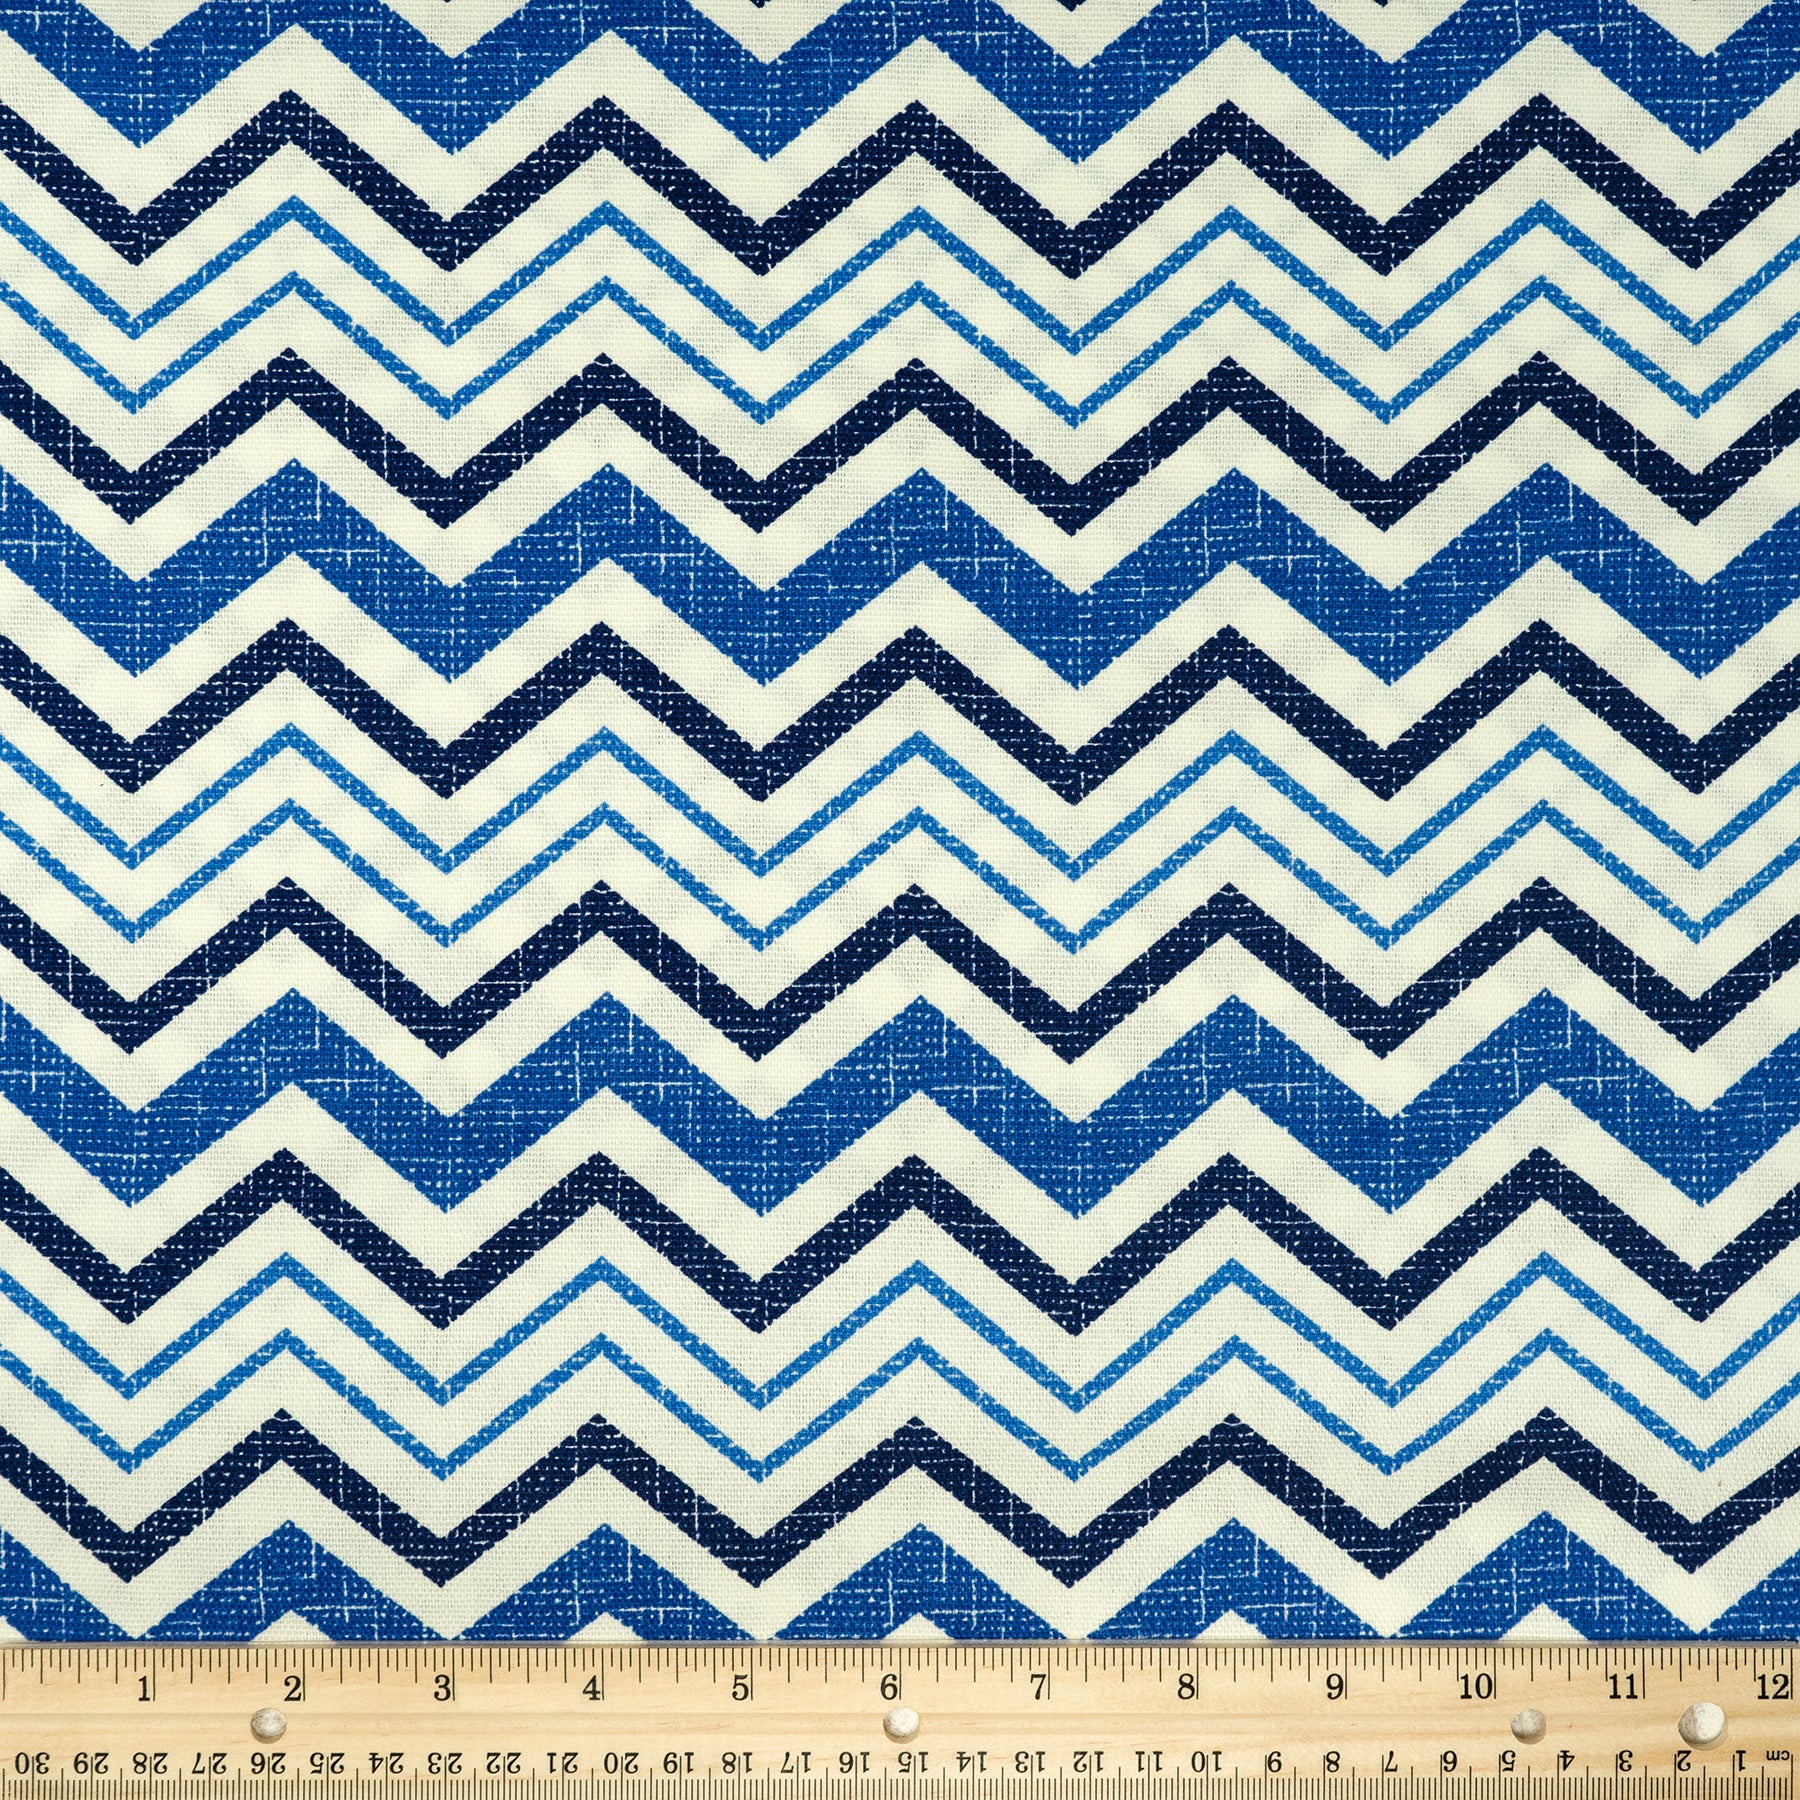 Waverly Inspirations 100% Cotton Duck 45" Width Chevron Navy Color Sewing Fabric by the Yard